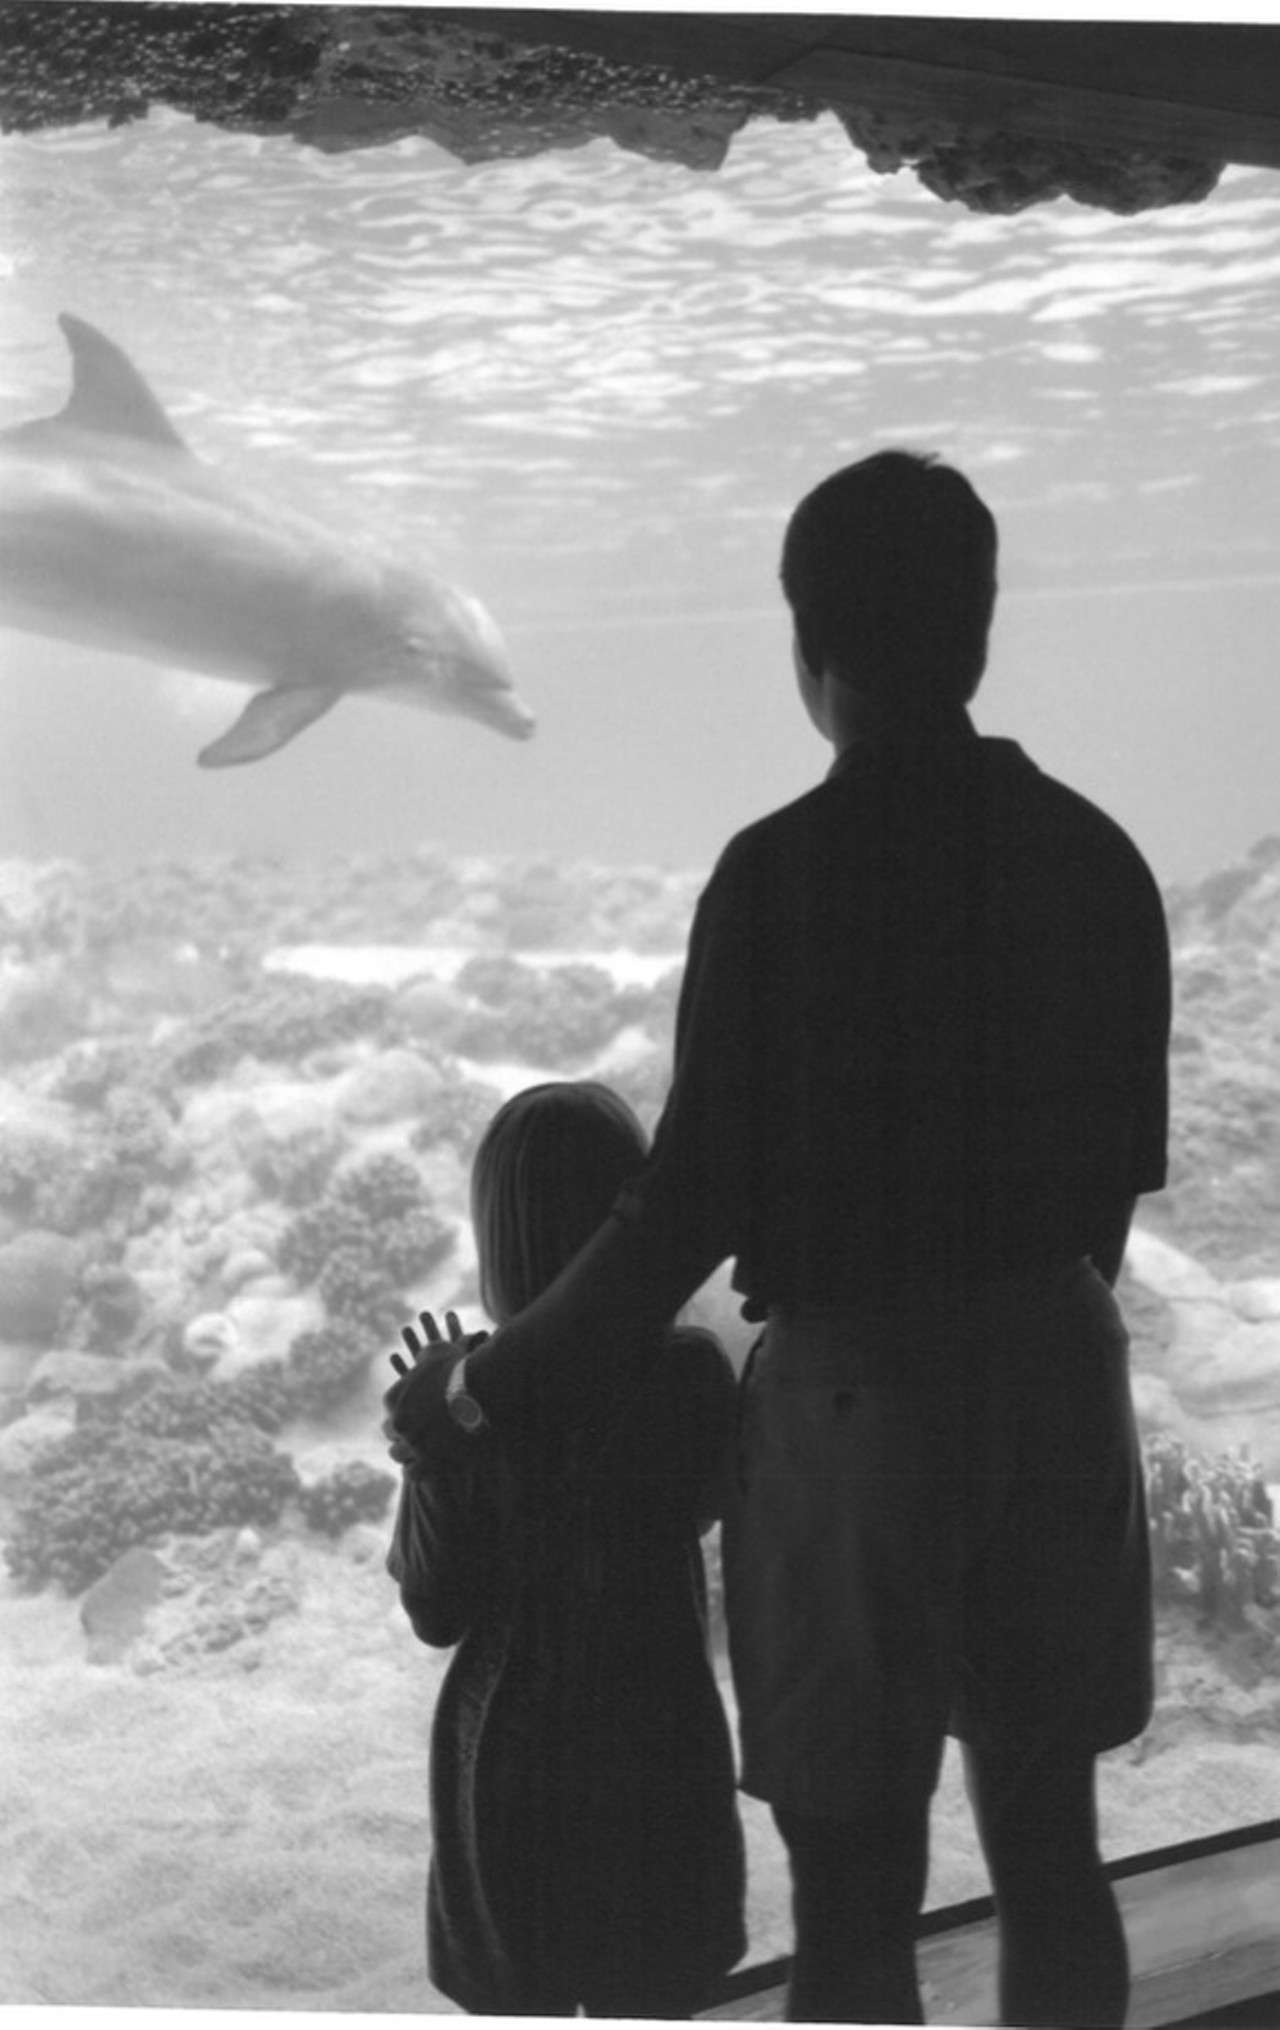 From the archives: Vintage photos of SeaWorld Orlando in the early '90s